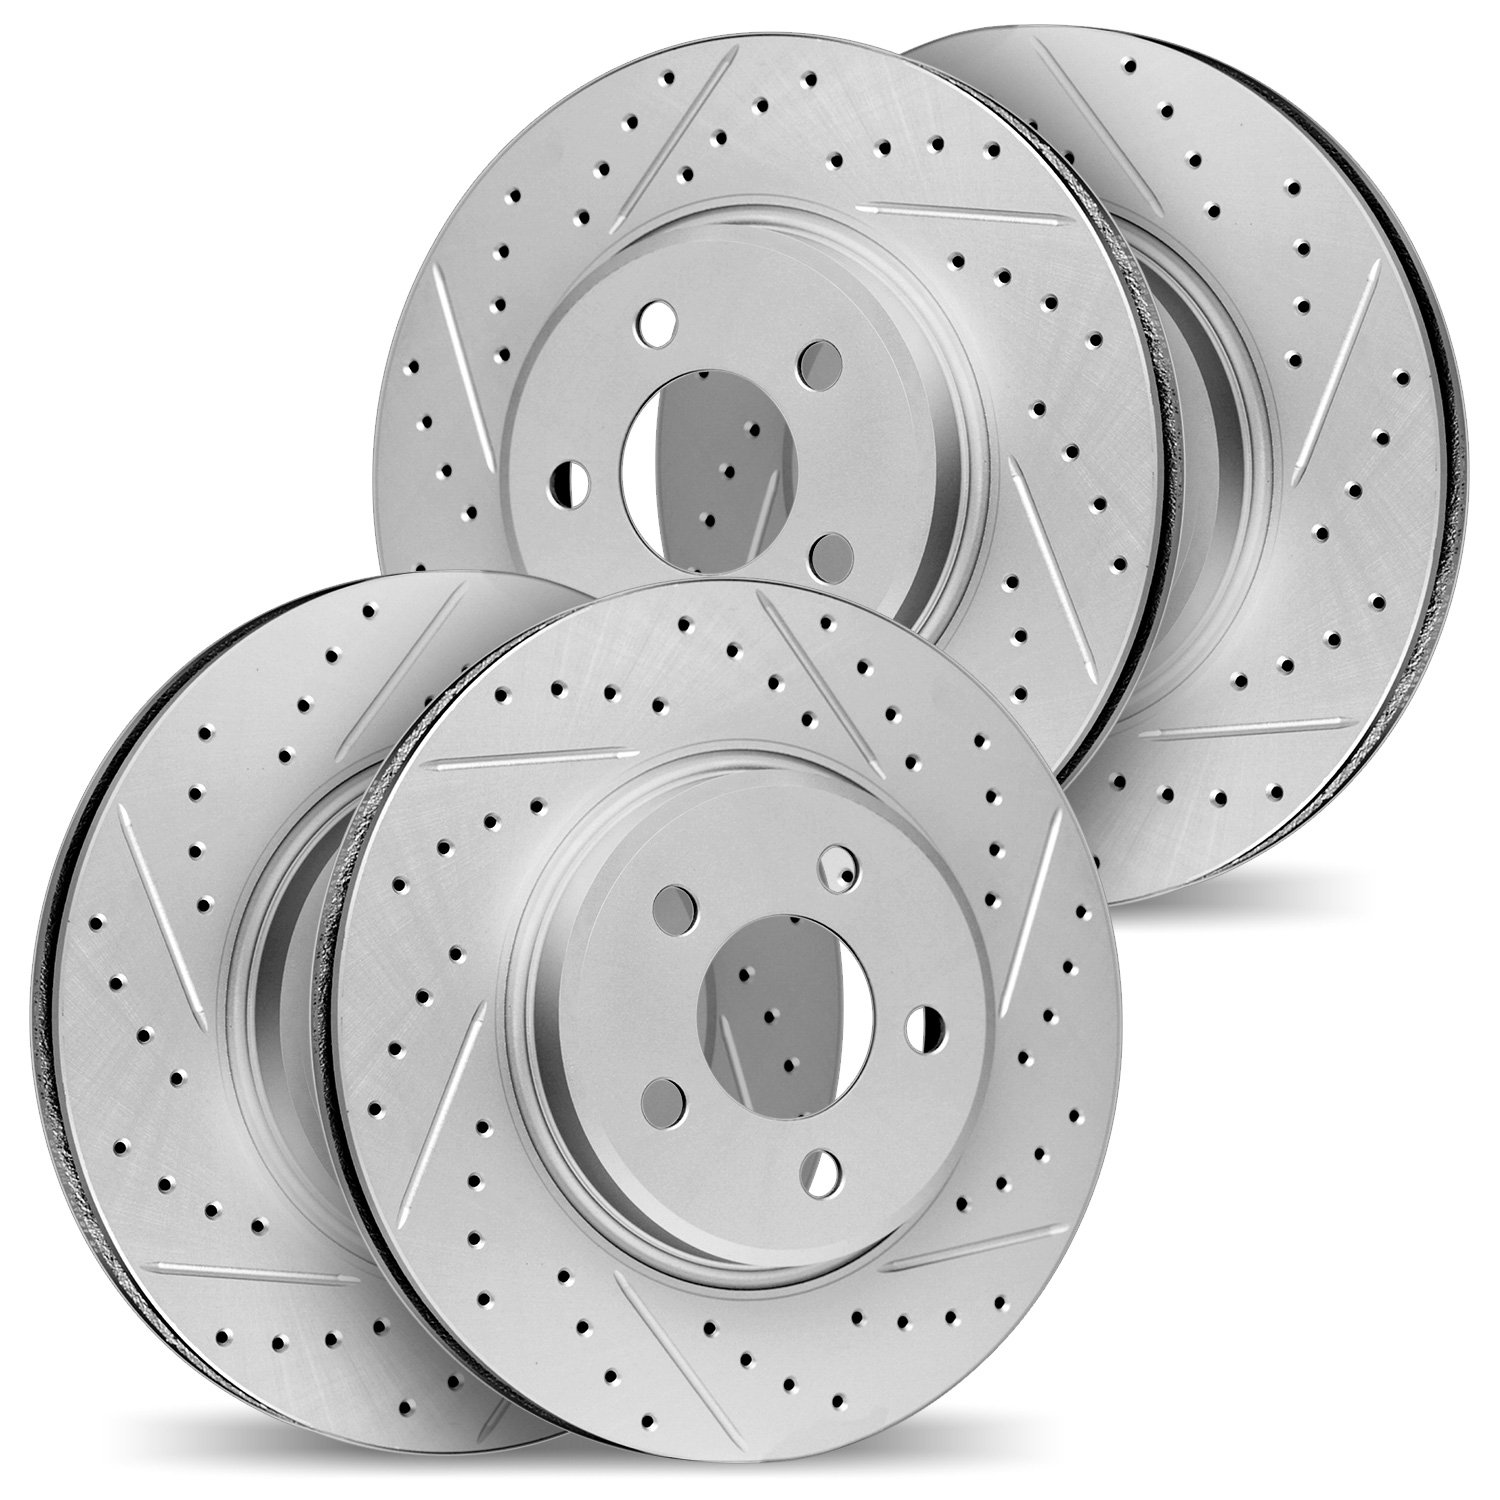 2004-58005 Geoperformance Drilled/Slotted Brake Rotors, 1997-2005 Acura/Honda, Position: Front and Rear